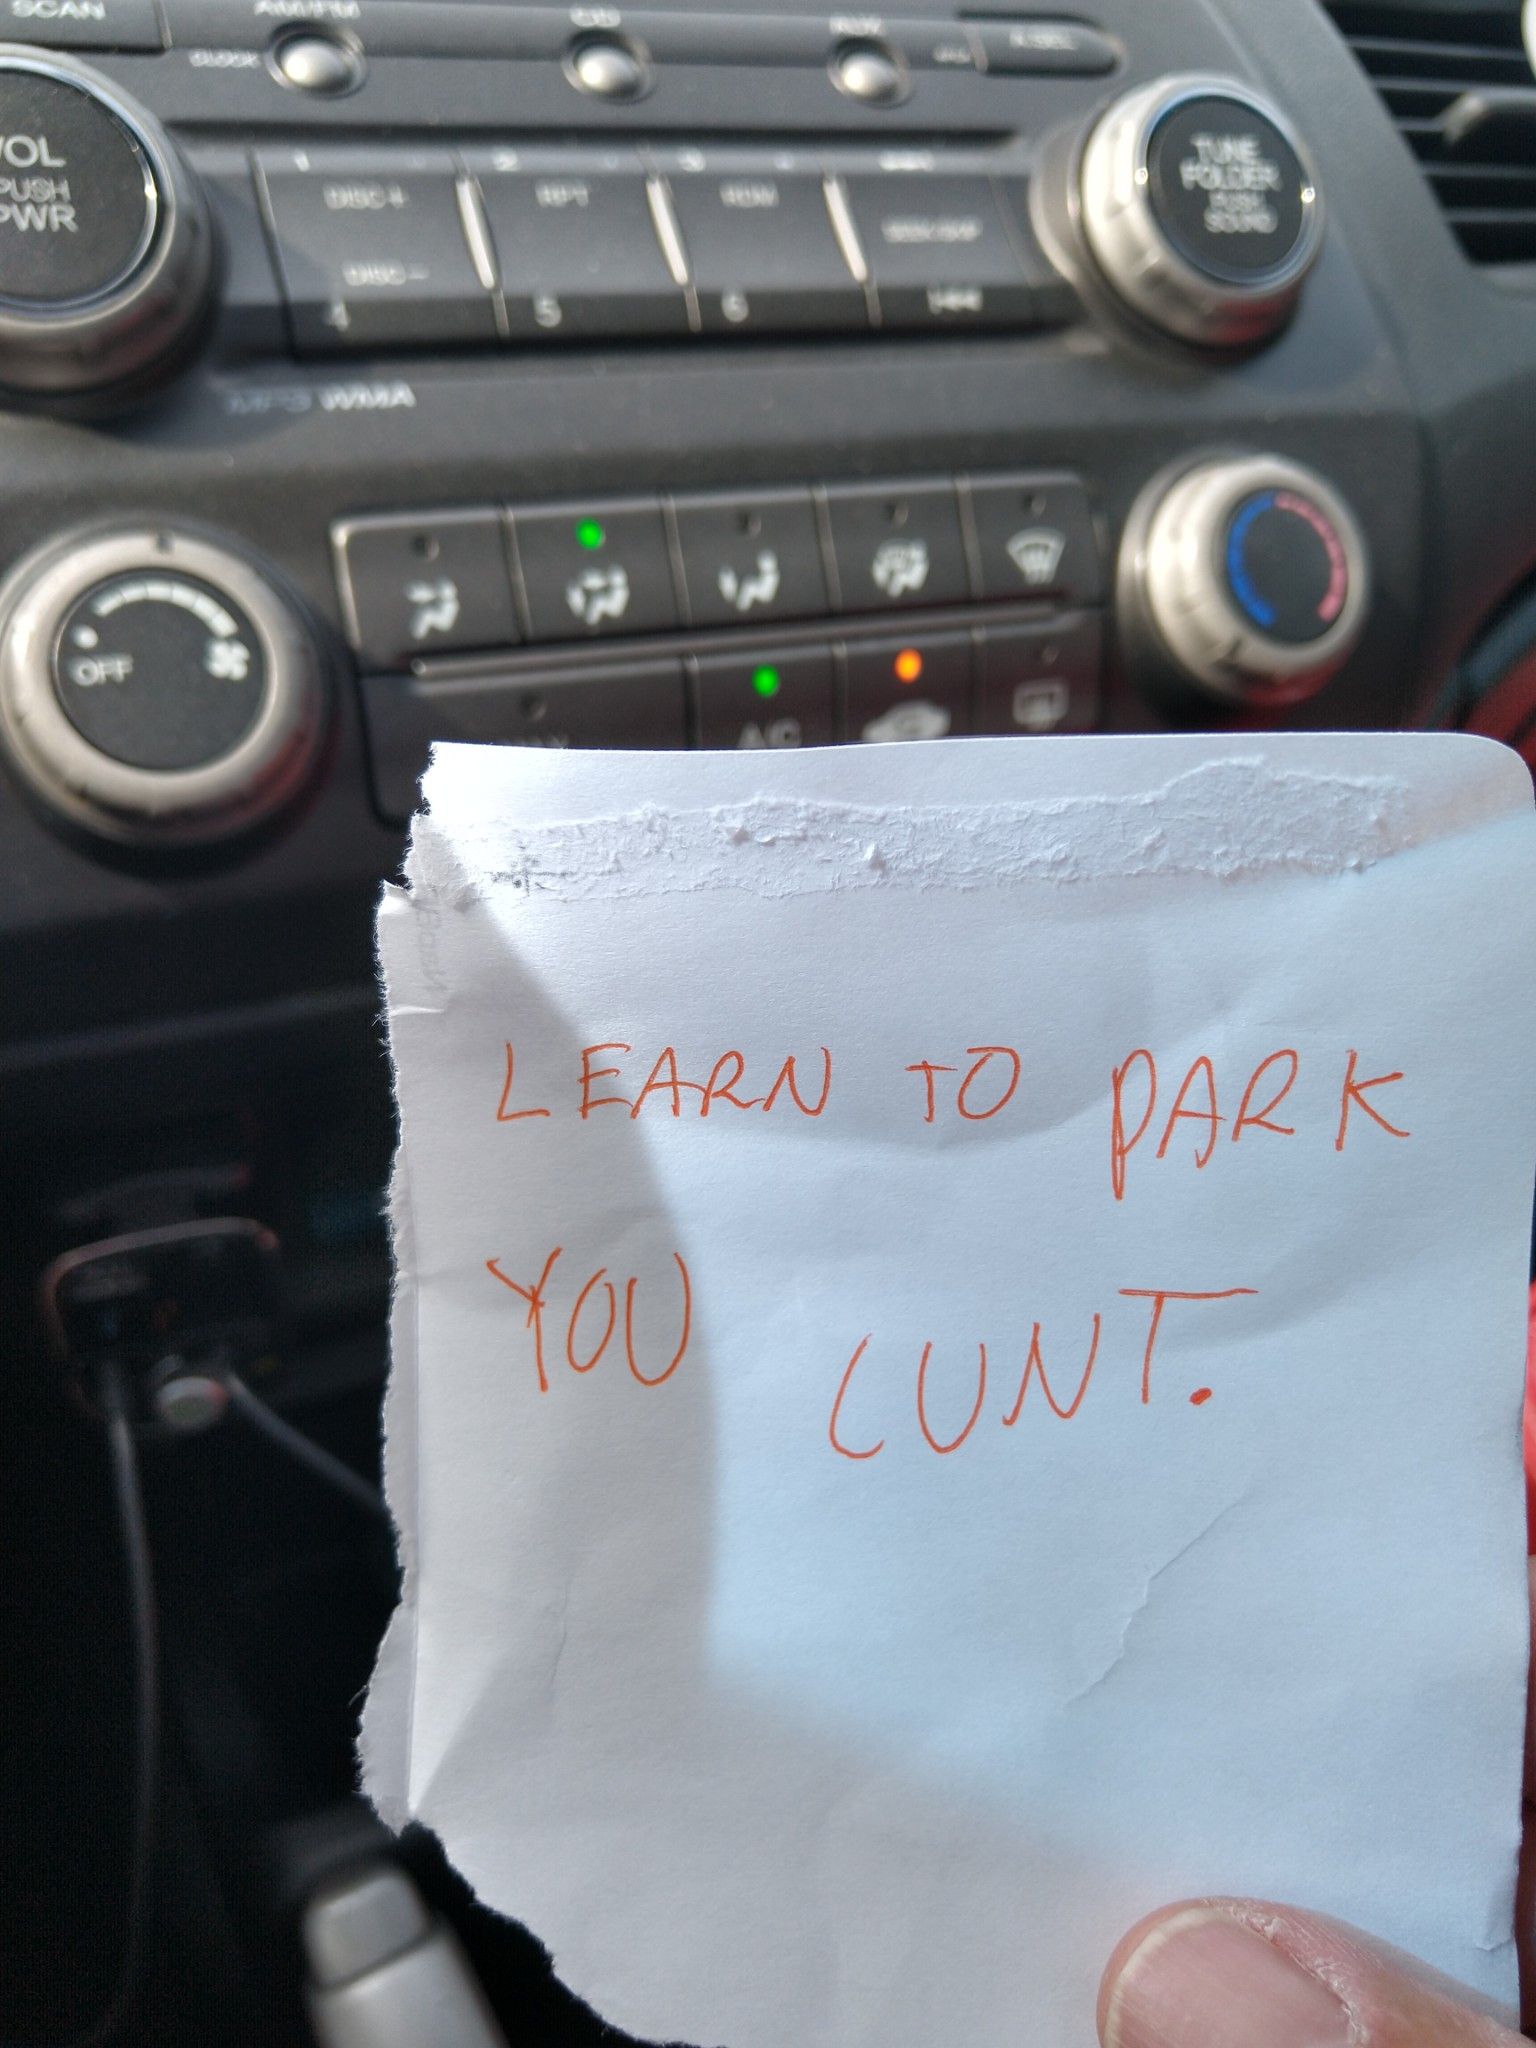 A pissed off old lady put this under my wiper yesterday. God bless her.